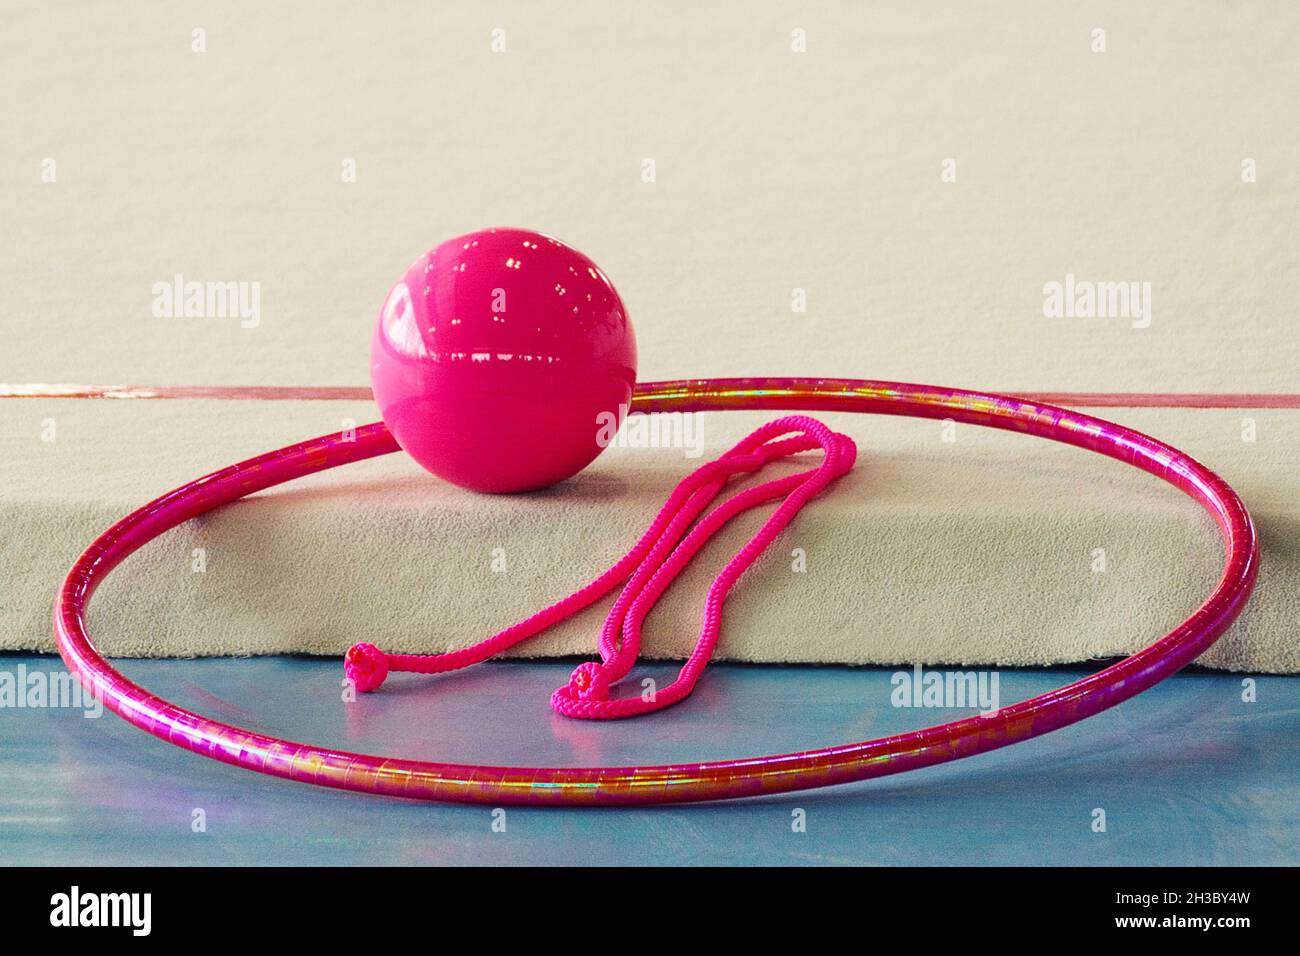 set of apparatus for rhythmic gymnastics in pink color ball, hoop